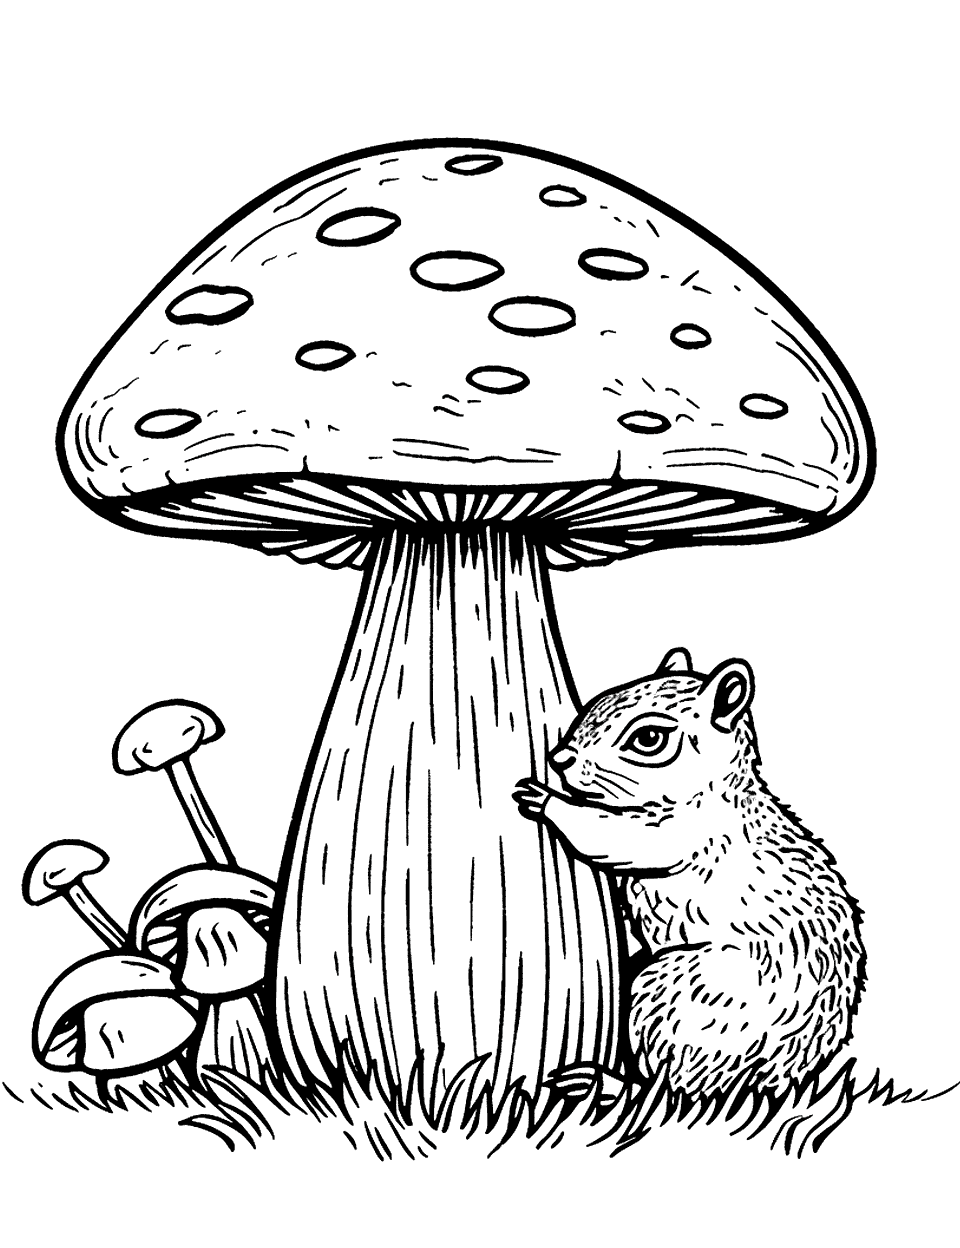 Squirrel and a Giant Mushroom Coloring Page - A squirrel stands on its hind legs to reach a giant mushroom.